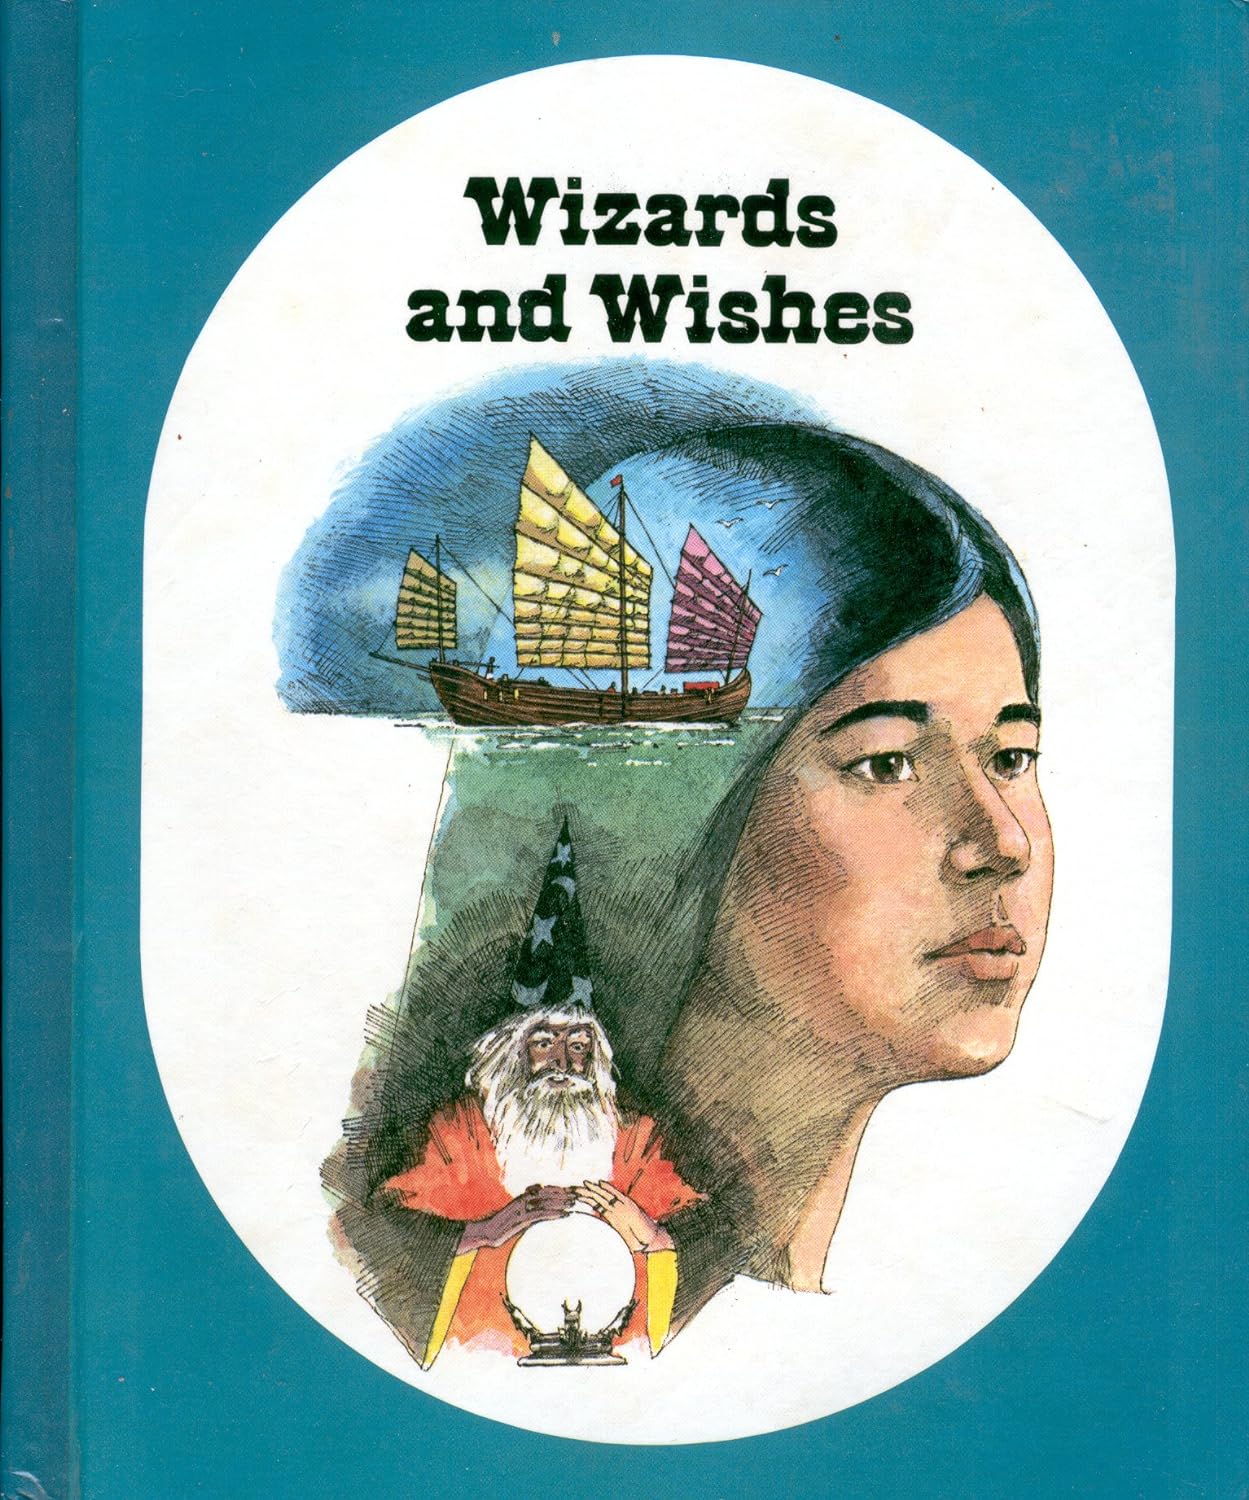 Wizards and wishes